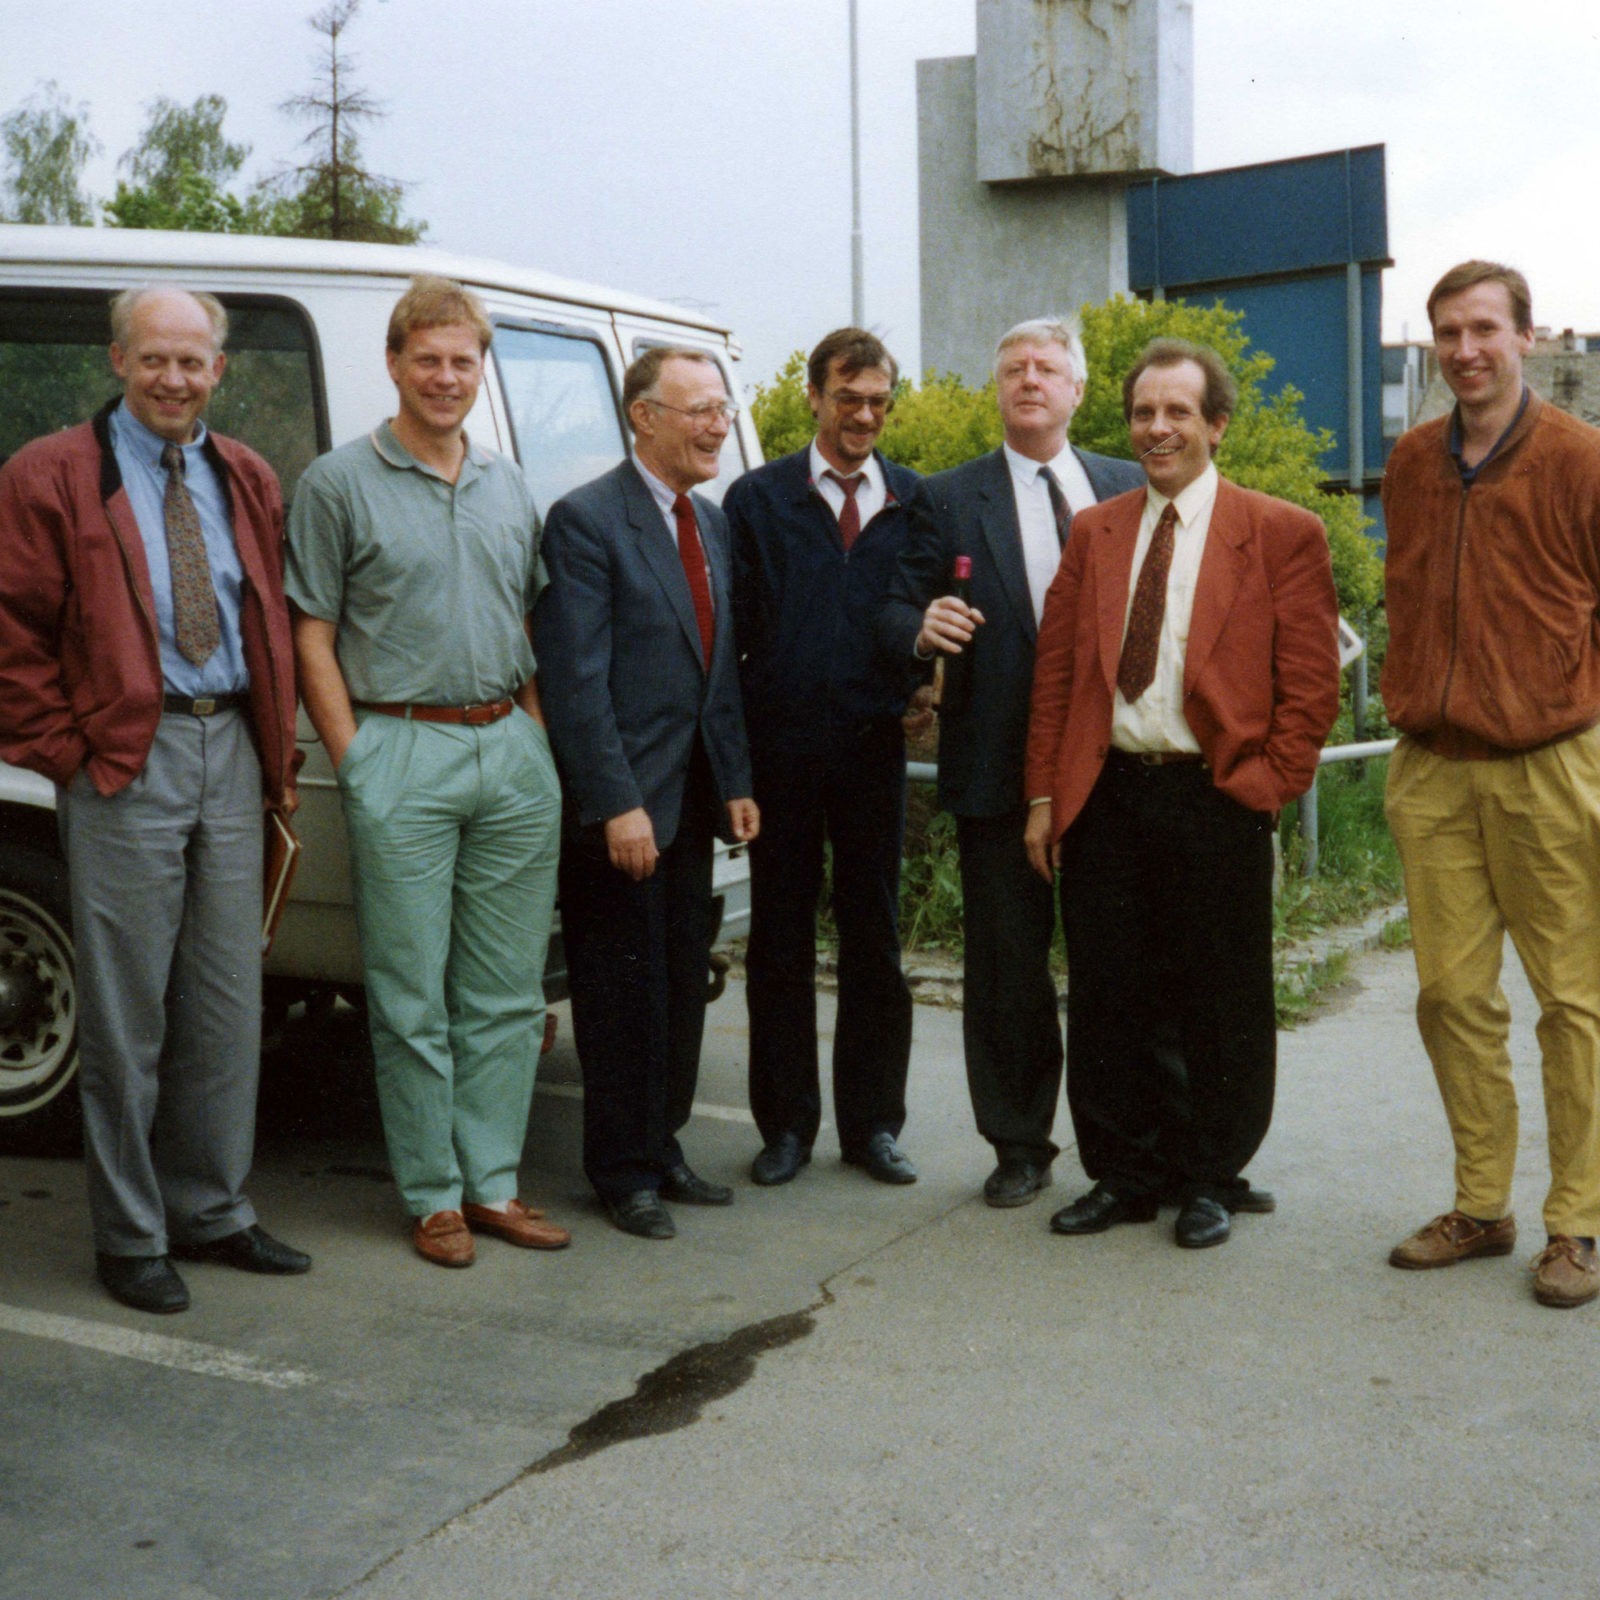 Seven men, dressed in 1980s style formal wear, laughing together in a parking lot at a factory site.